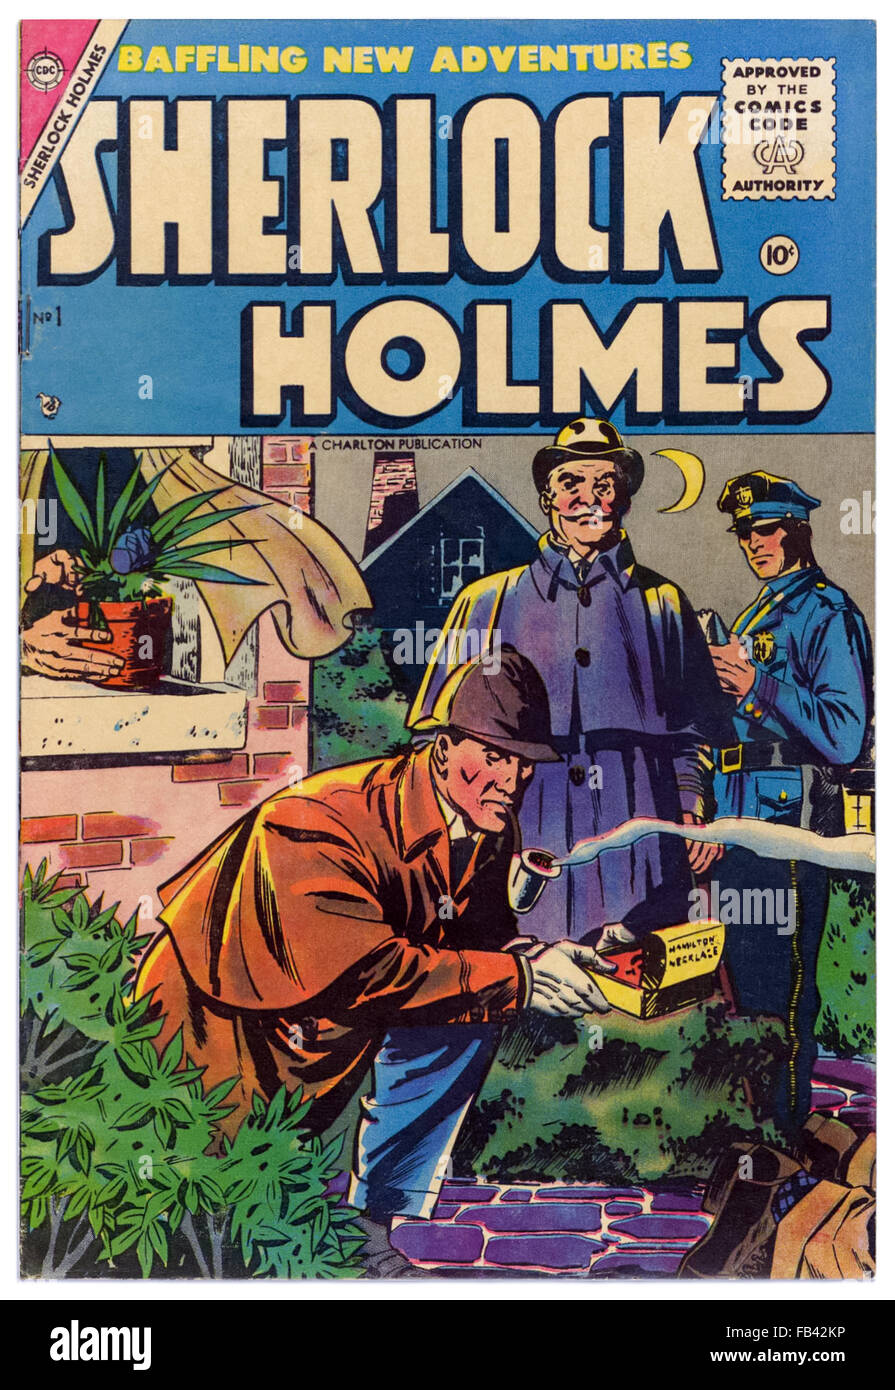 'All New Baffling Adventures of Sherlock Holmes' Charlton Comics 1955, comic book adaptation where Sherlock is relocated to New York City. Only 2 issues were ever produced (see FB5RW4 for issue 2). Stock Photo